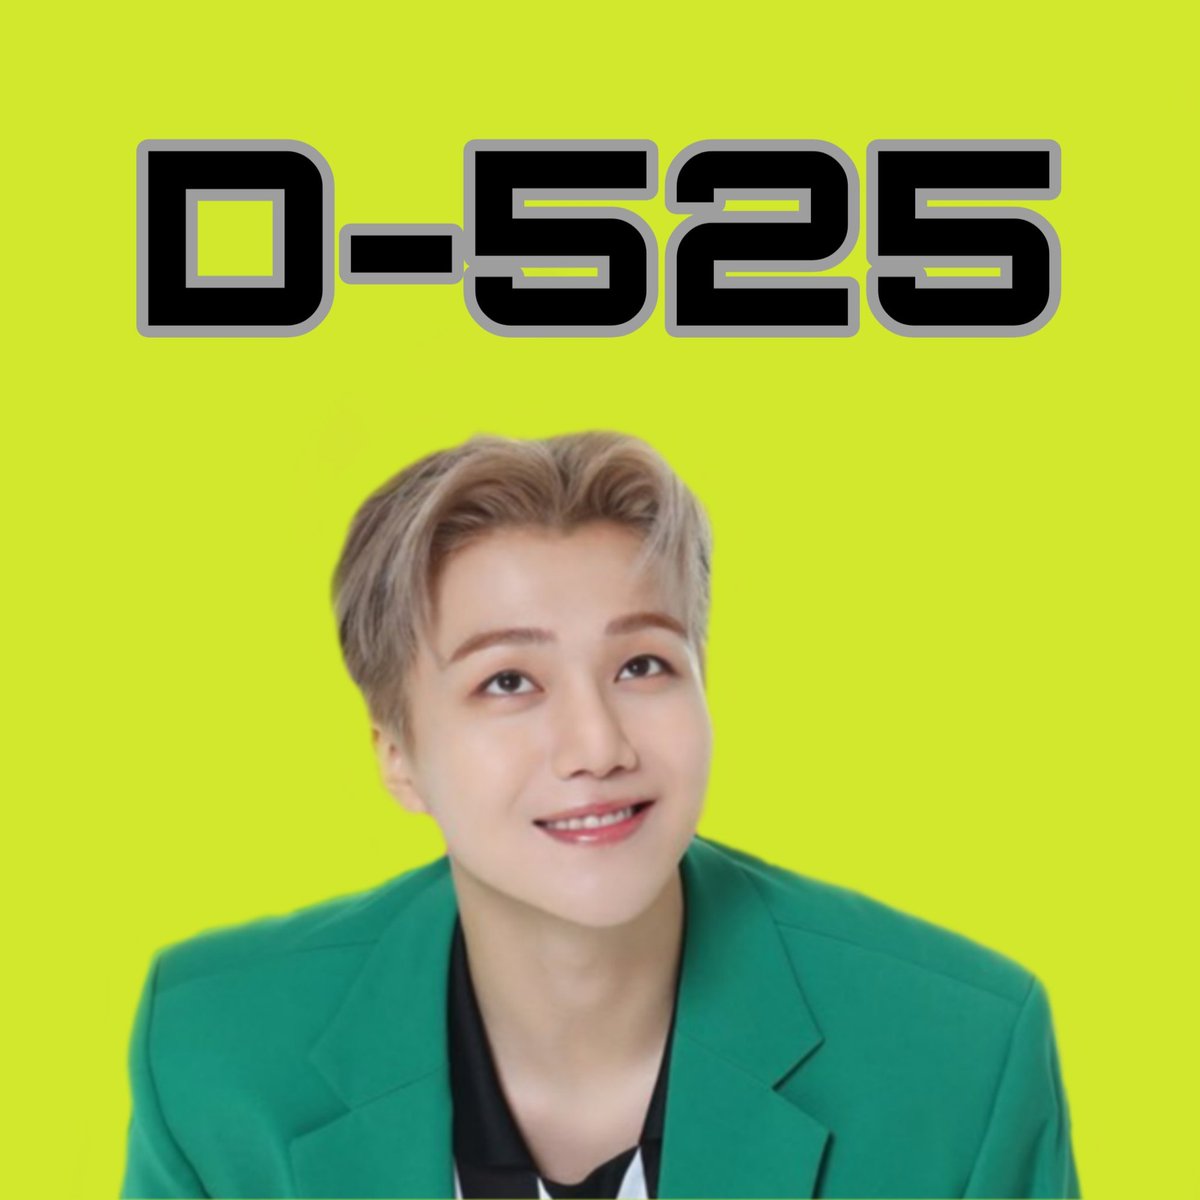 D-525- Happy sunday Jinho. Weekend is almost over again. Did you have a good rest? Always take care of yourself   #PENTAGON  #JINHO  #펜타곤  #진호  @CUBE_PTG